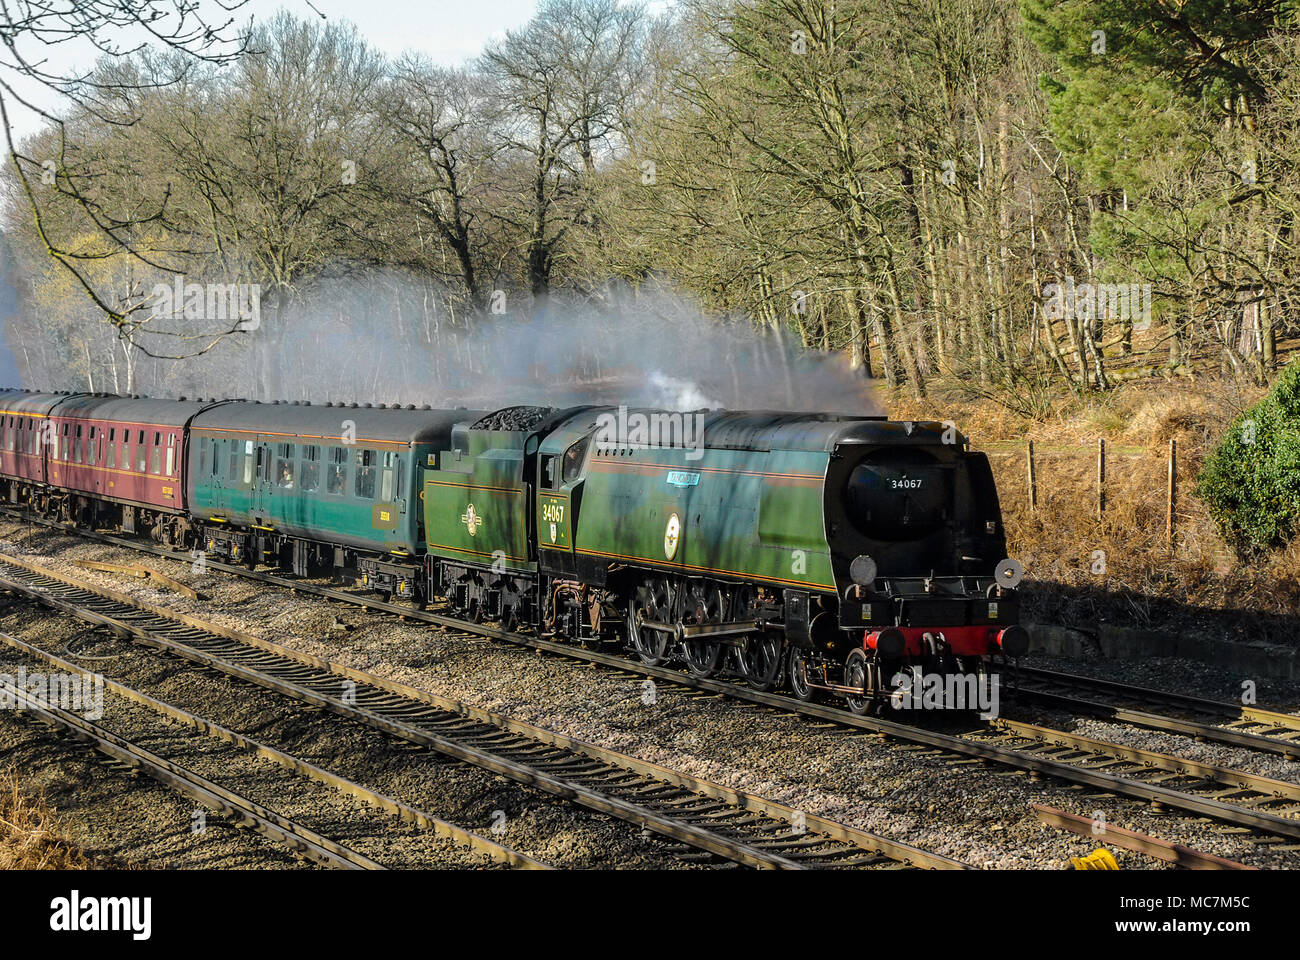 Tangmere 34067, Bulleid light pacific steam locomotive. Battle of Britain class loco on the BR mainline hauling a steam special train. Tree lined cut Stock Photo